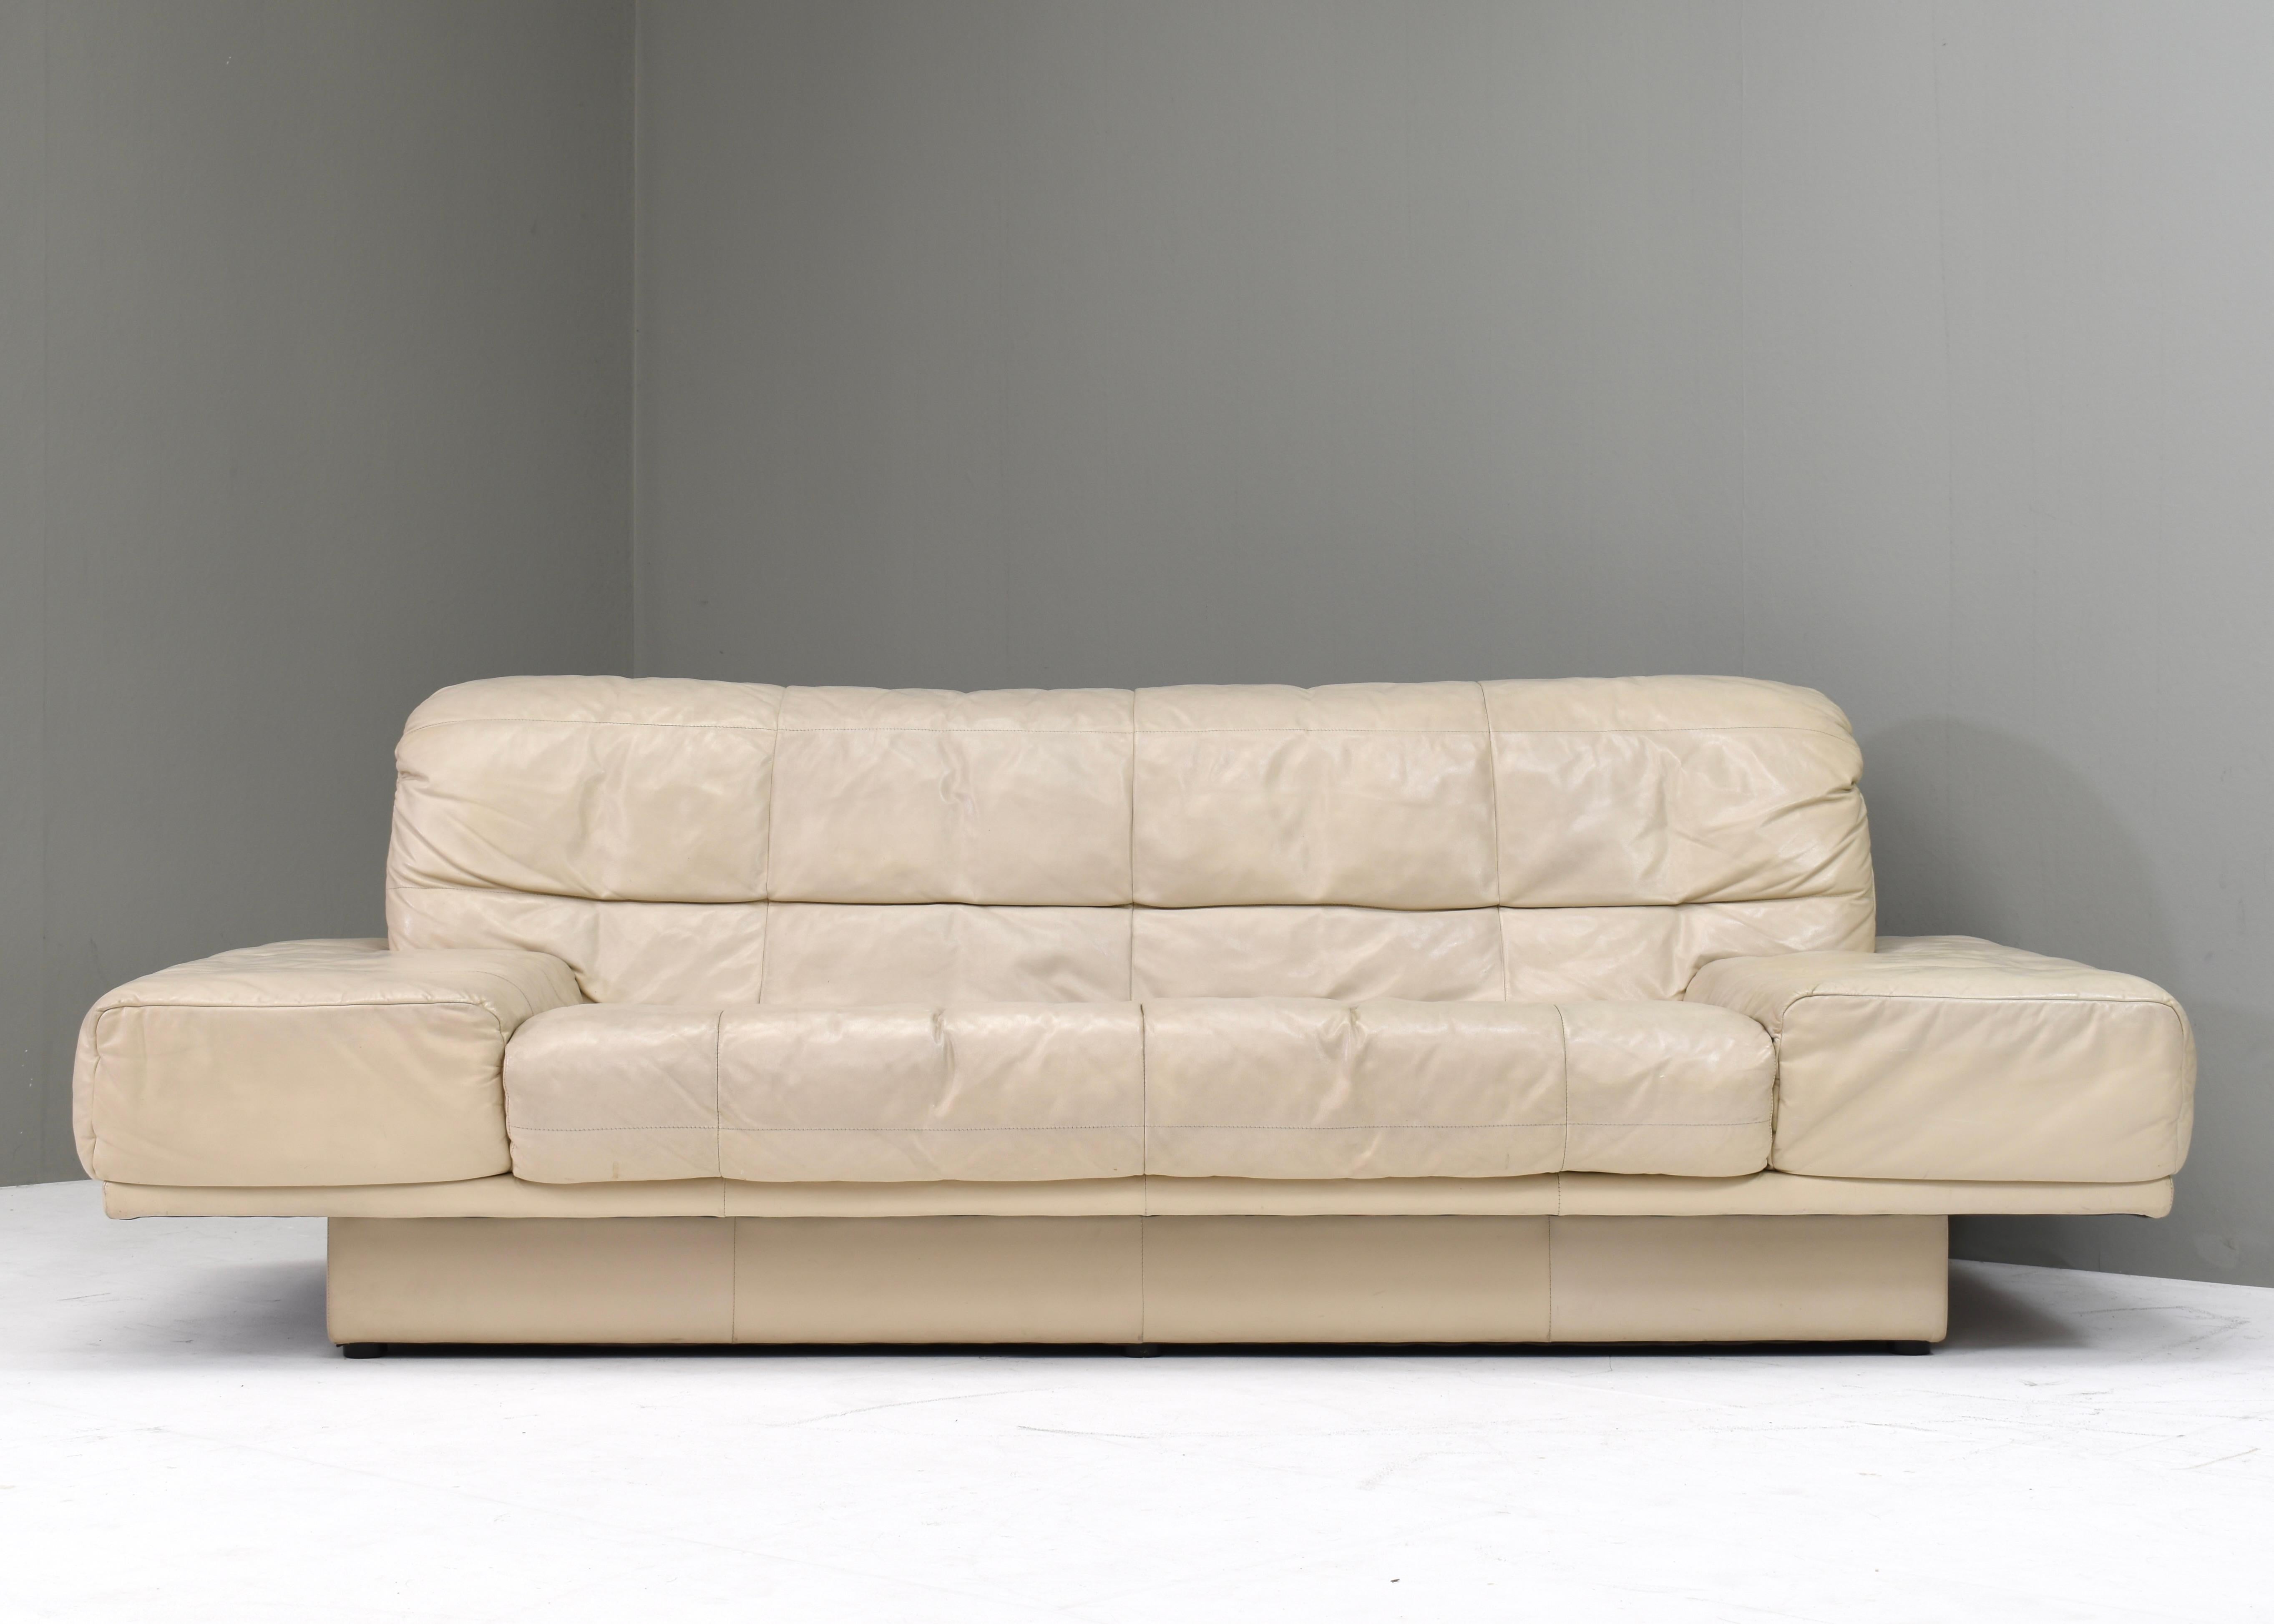 Mid-Century Modern Rolf Benz 3-seat sofa in Ivory Cream Leather – Germany, circa 1980-1990 For Sale